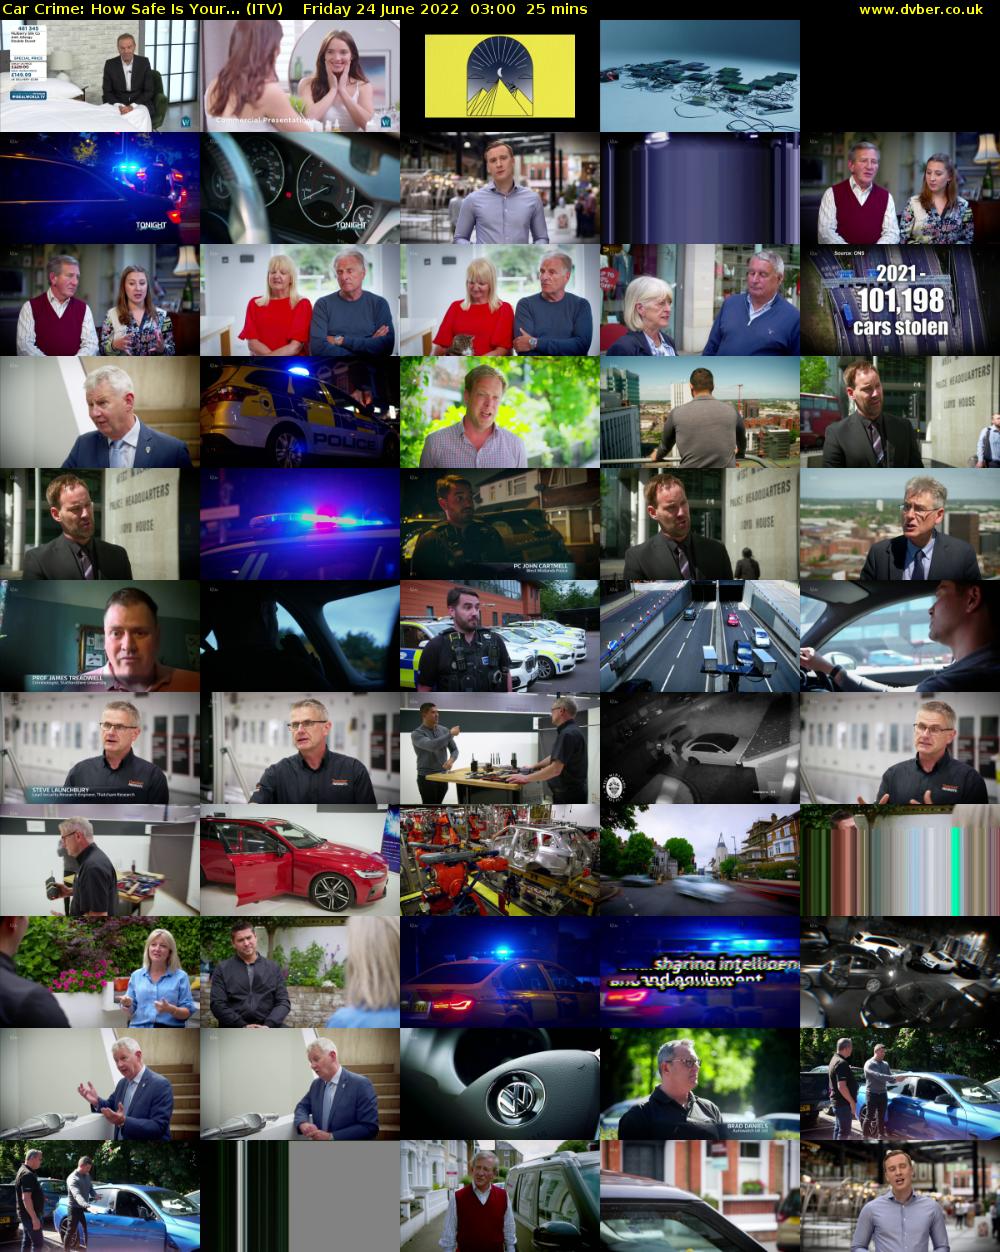 Car Crime: How Safe Is Your... (ITV) Friday 24 June 2022 03:00 - 03:25